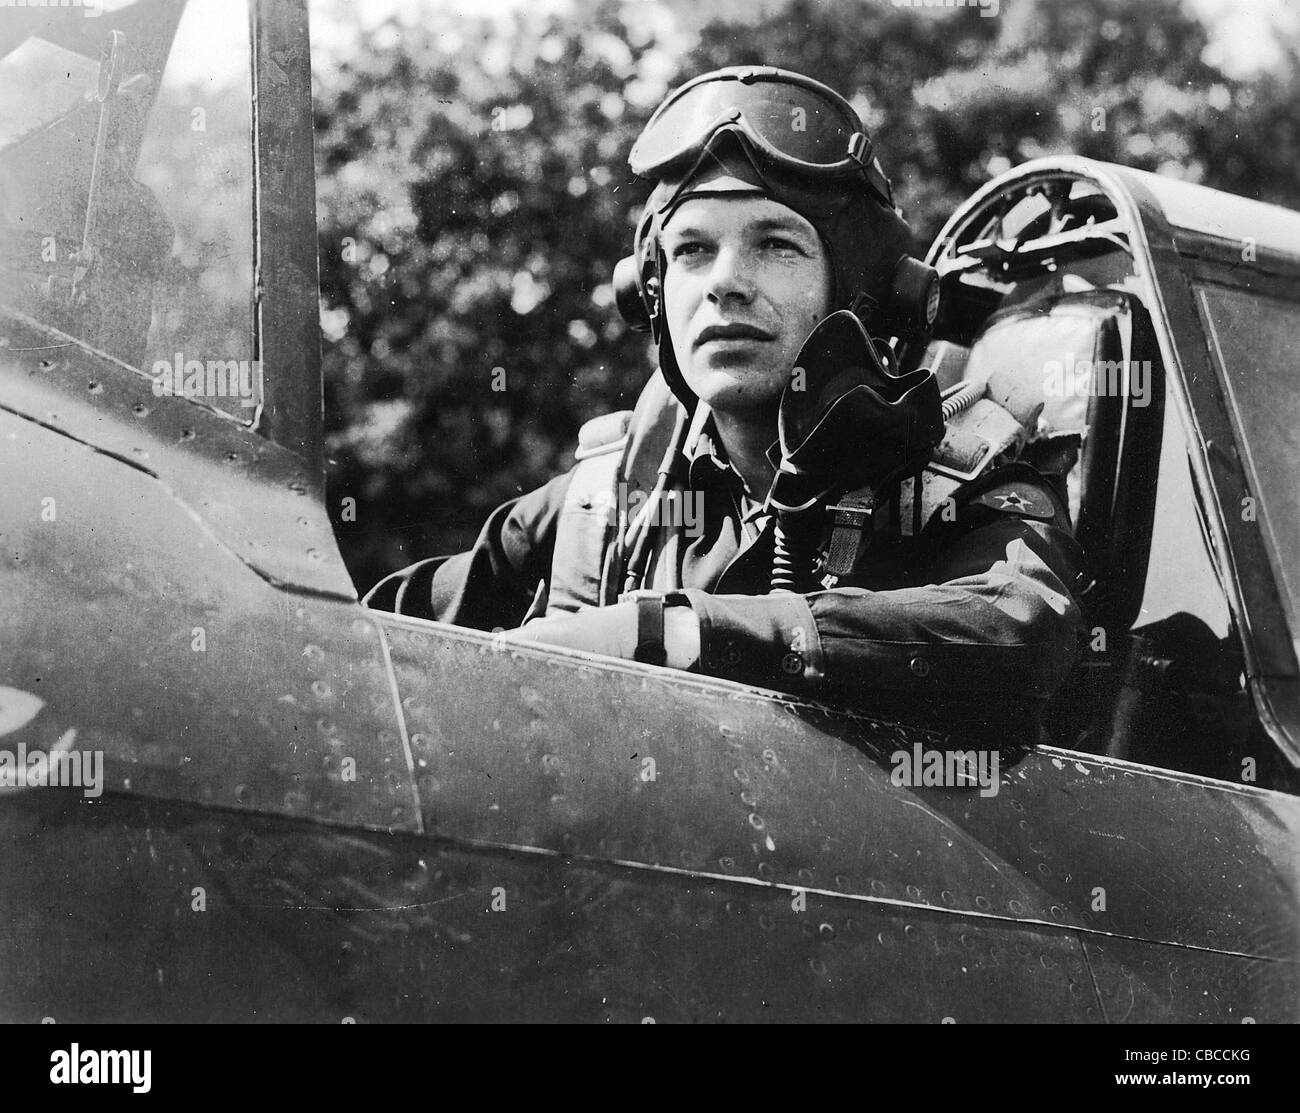 P47 Thunderbolt pilot of the USAAF sits in his aircraft cockpit during WW11 Stock Photo